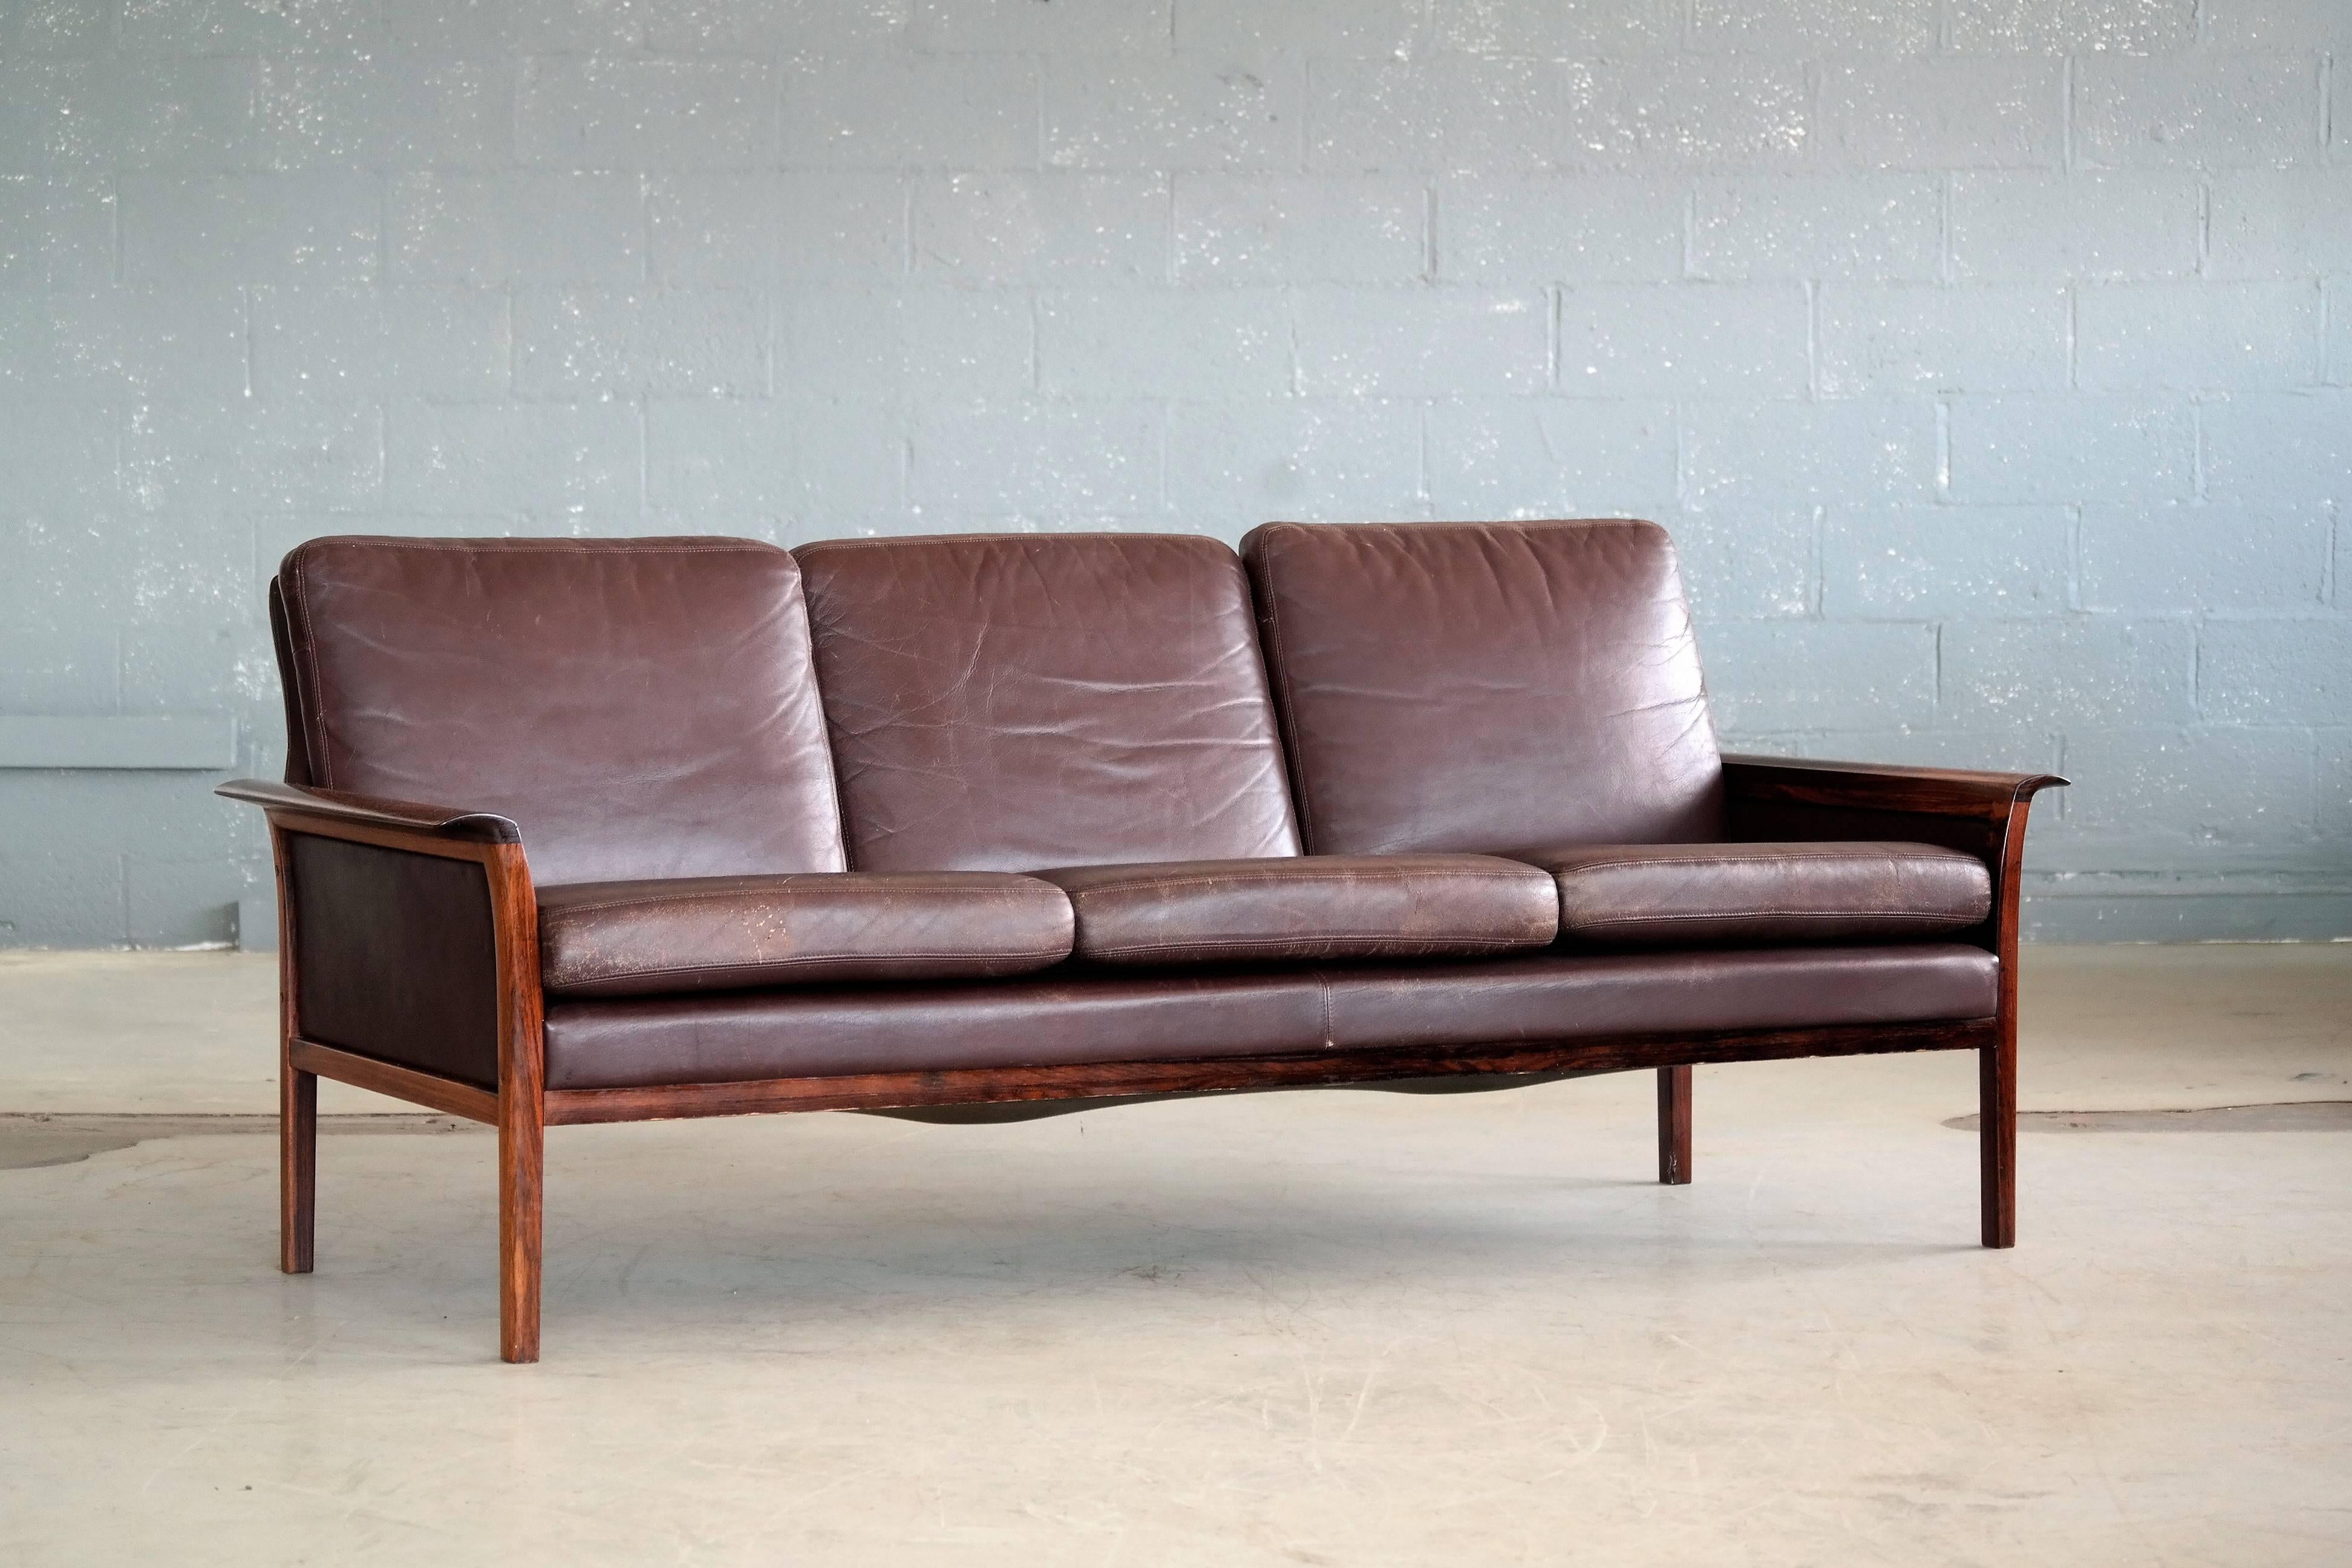 Beautiful Hans Olsen and Knut Saeter designed three-seat sofa in supple cordovan leather and rosewood frame manufactured by Vatne of Norway in the late 1960s. Olsen's characteristic design with finely polished rolled wing shaped armrests in solid